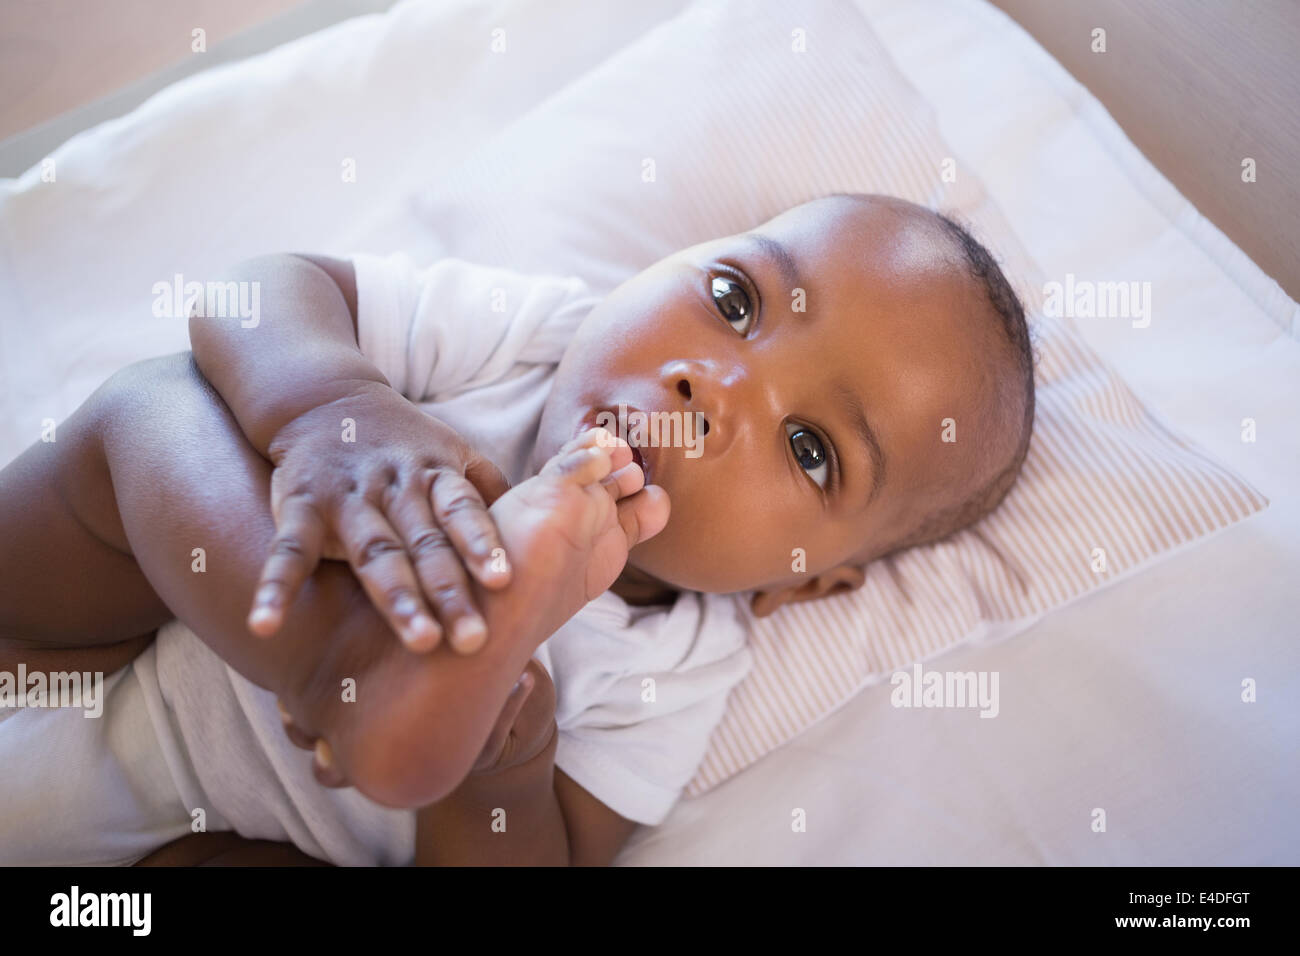 Adorable baby boy lying in his crib holding foot Stock Photo